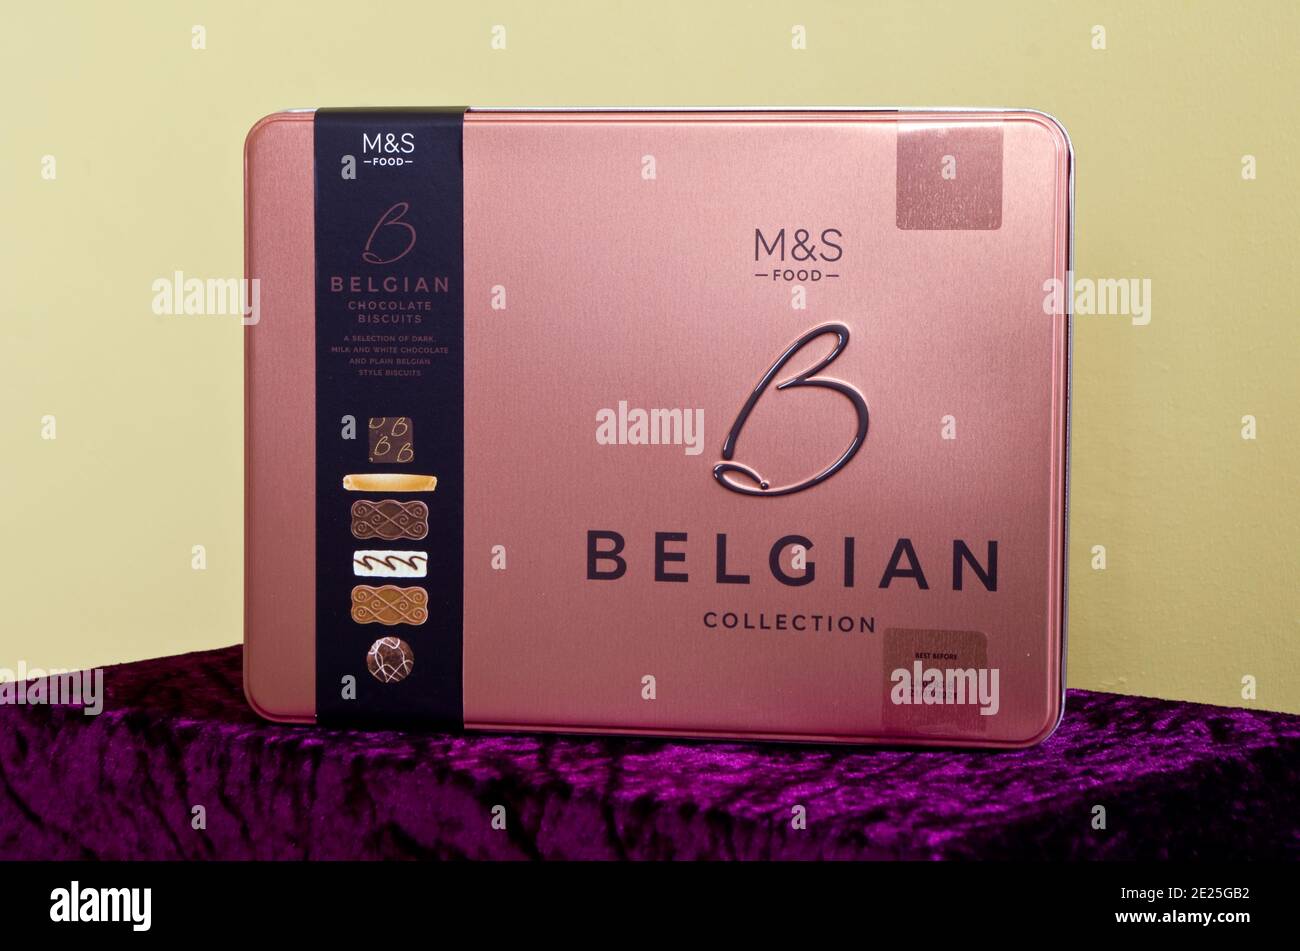 Tin of M&S Food Belgian Collection Chocolate Biscuits, UK Stock Photo